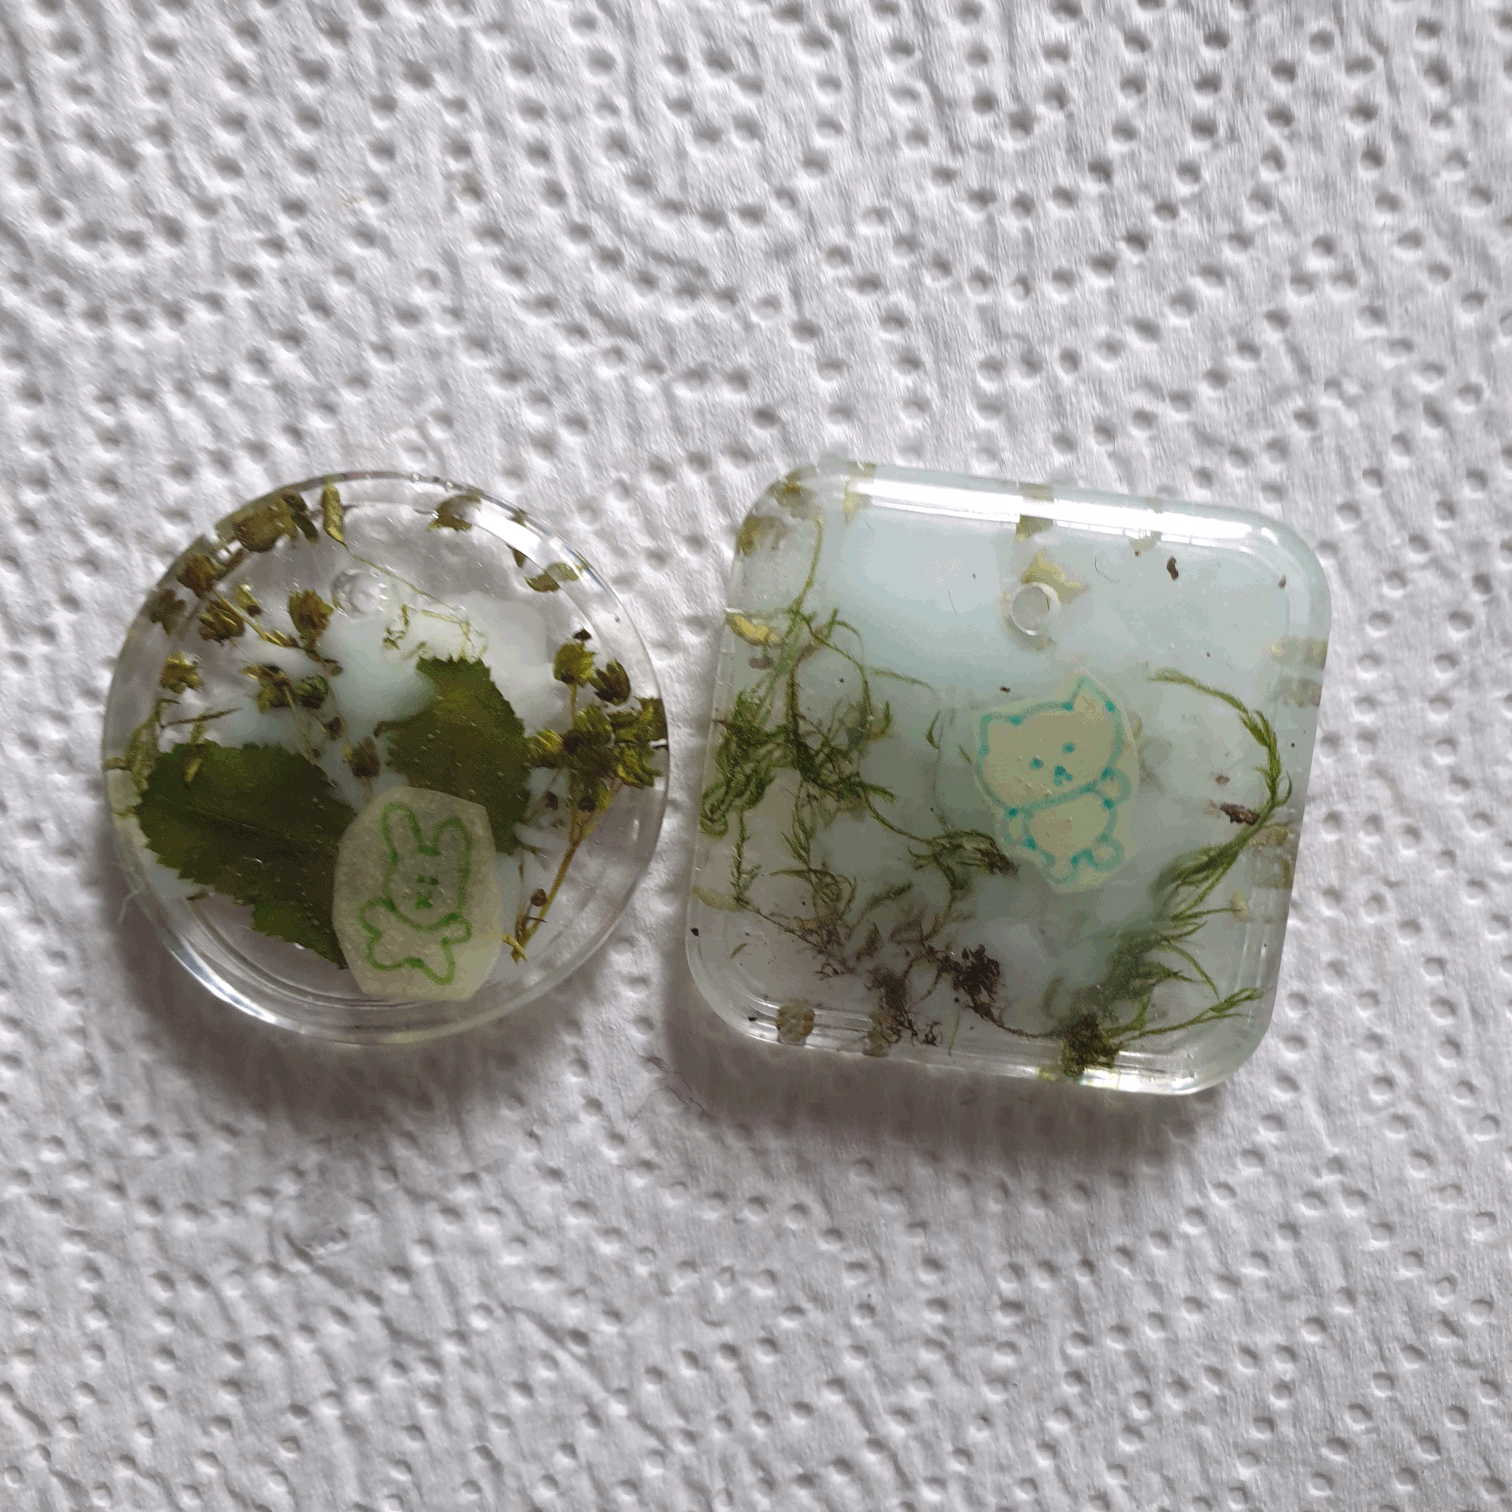 2 resin keychains with plants and a small doodle on paper inside, one cat and one bunny.